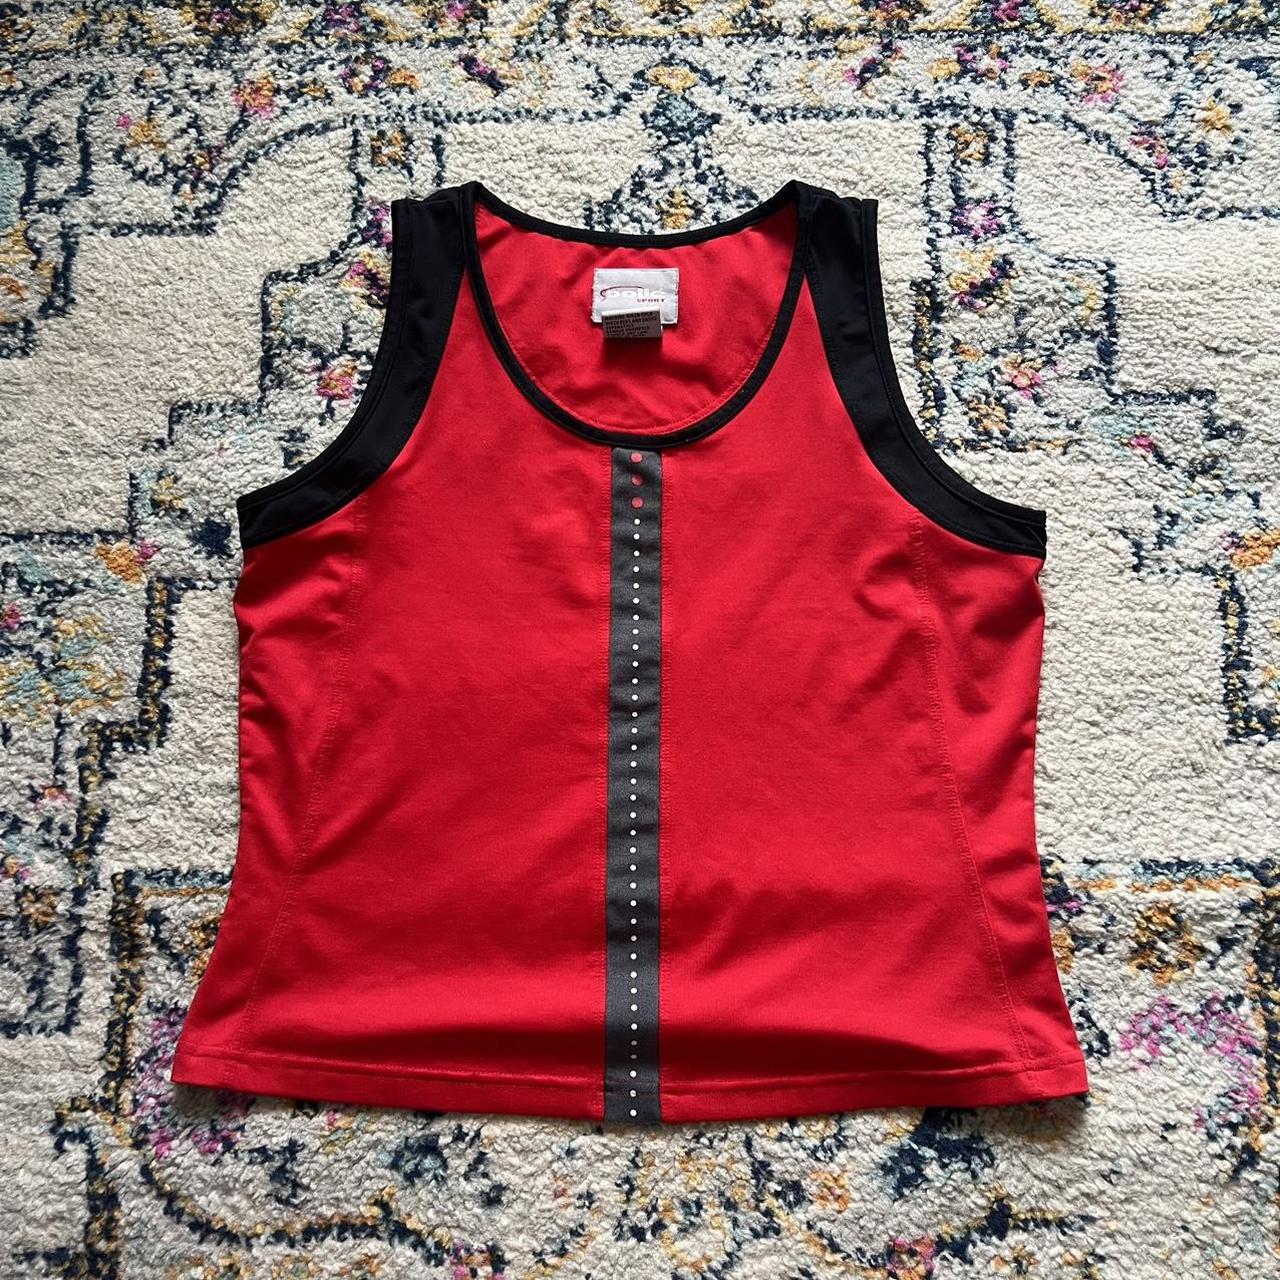 Bollé Women's Red and Black Vest